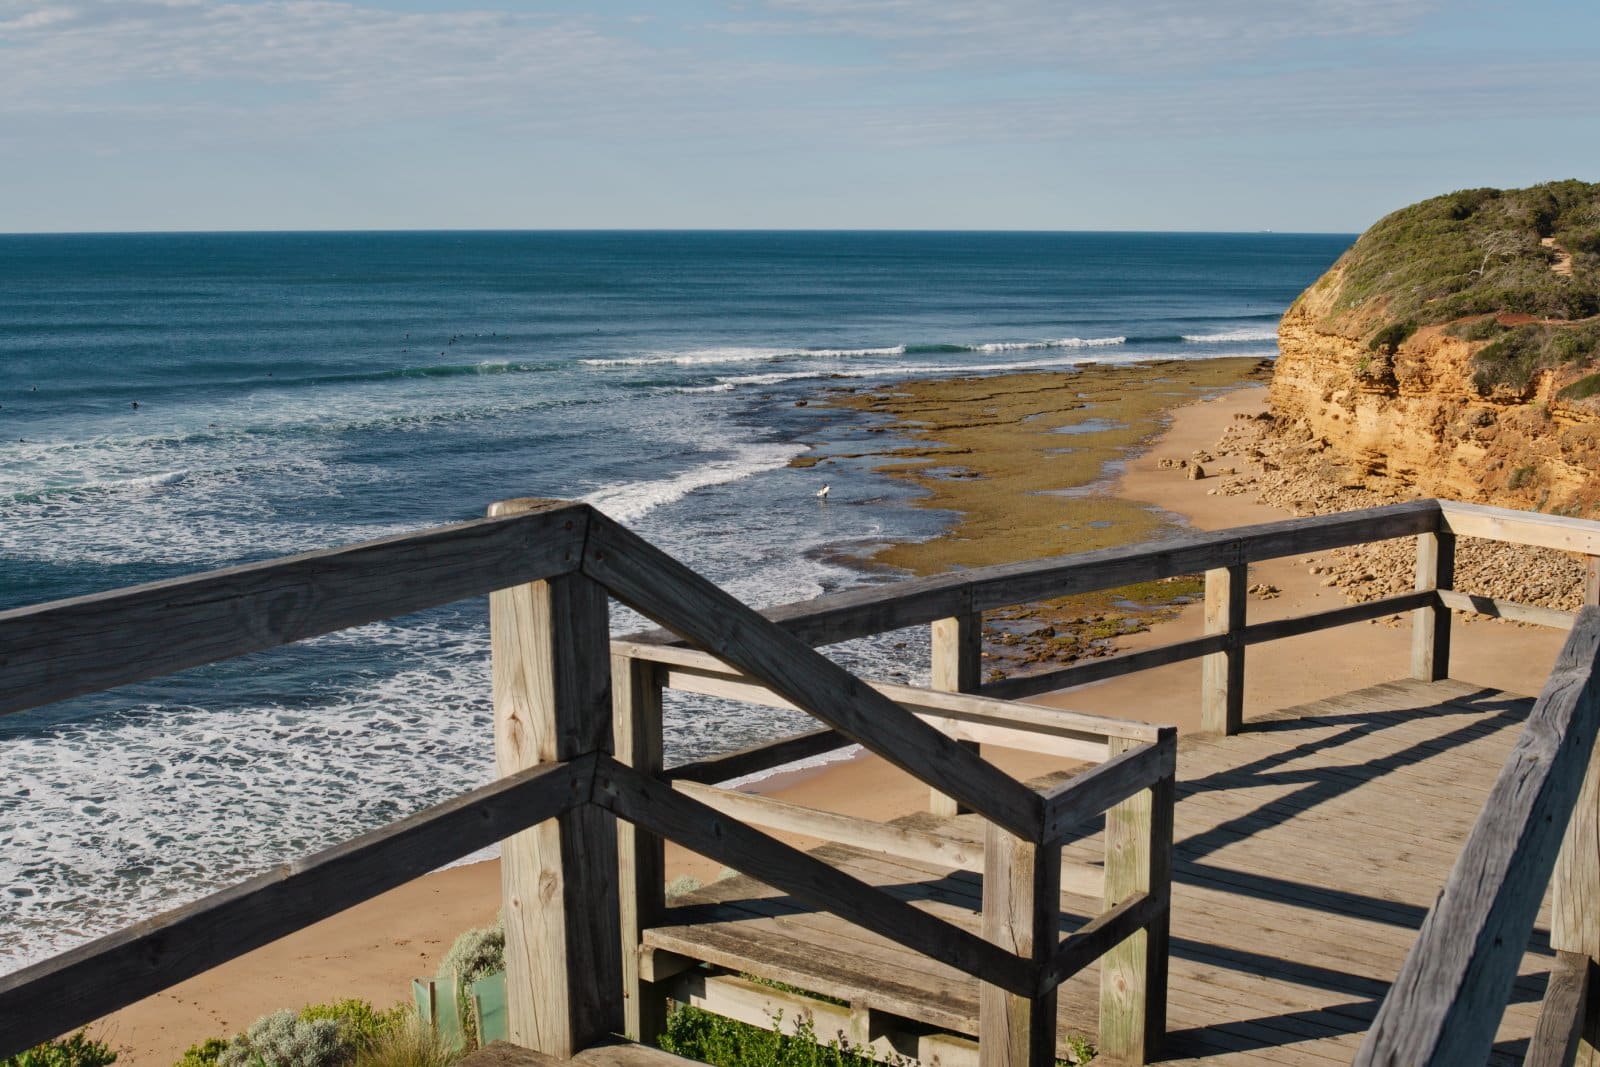 <p class="wp-caption-text">Image Credit: Shutterstock / View Factor Images</p>  <p>Welcome to the home of the Rip Curl Pro—the legendary Bells Beach. Located on Australia’s scenic Great Ocean Road, this iconic break delivers some of the most perfect and powerful waves you’ll ever ride. Whether you’re charging the bowl or getting barrelled off your nut, Bells offers up endless waves and endless stoke.</p>